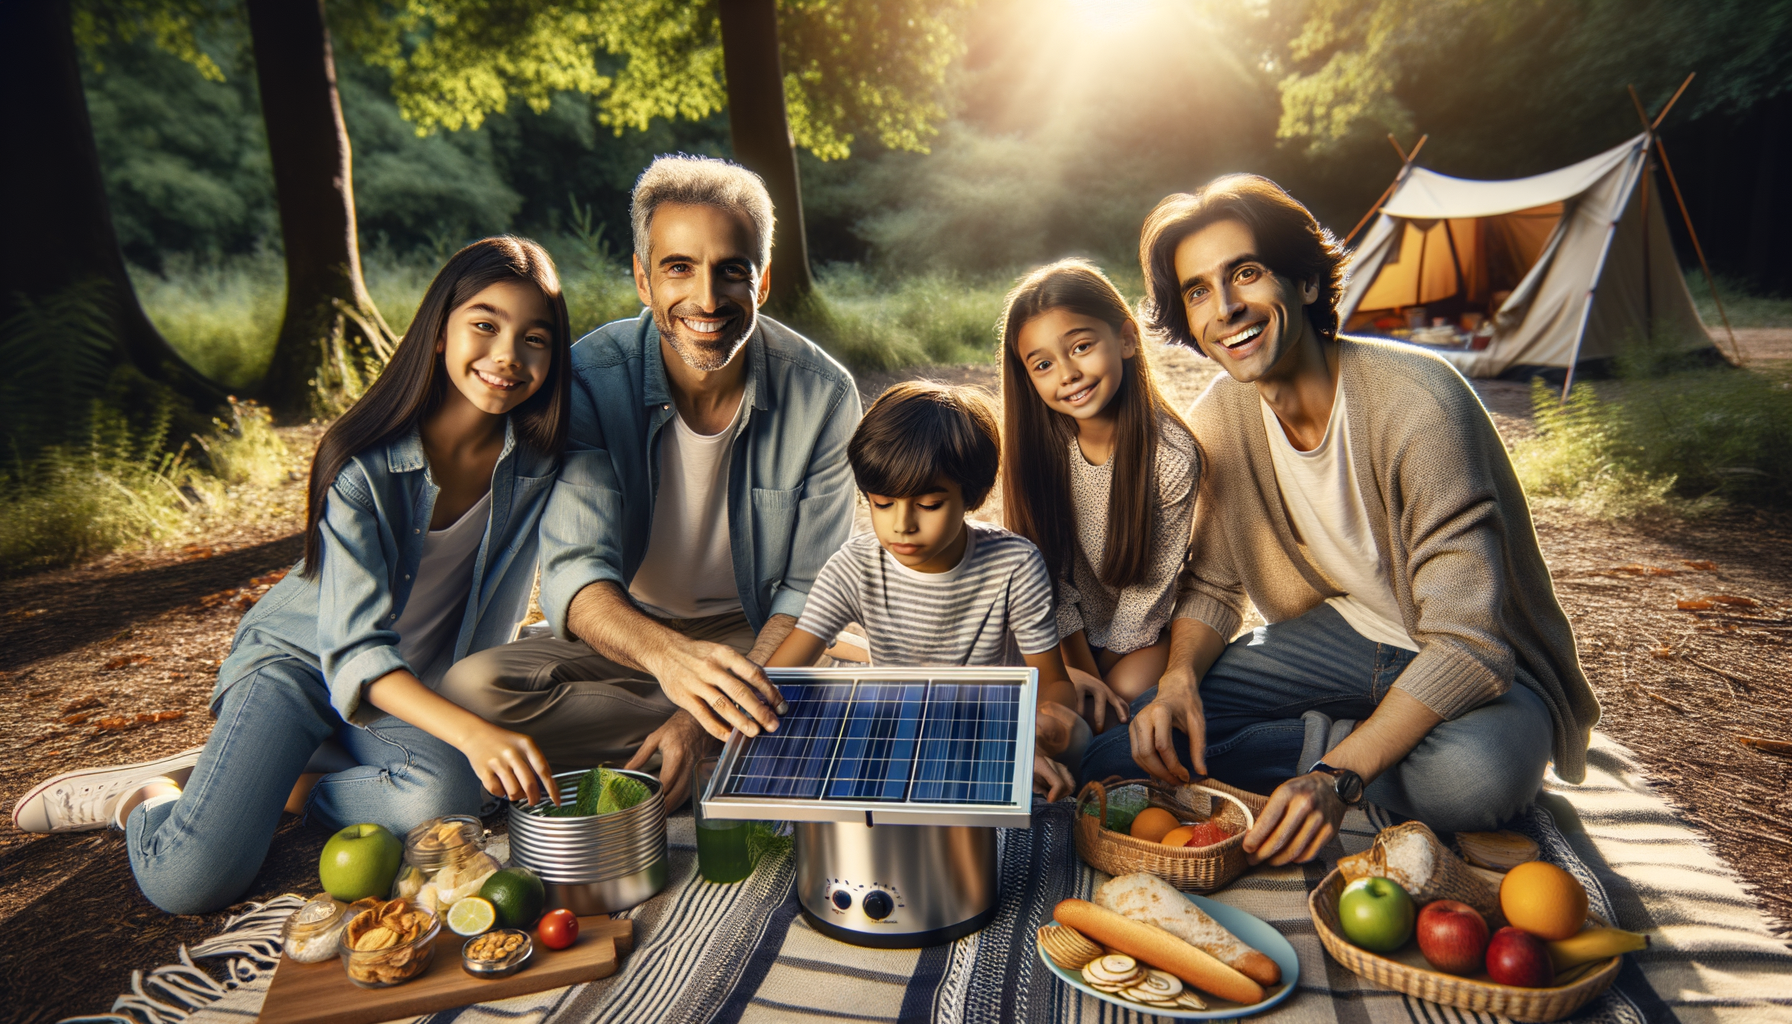 ALT: A happy family cooking with a solar cooker on a sunny day